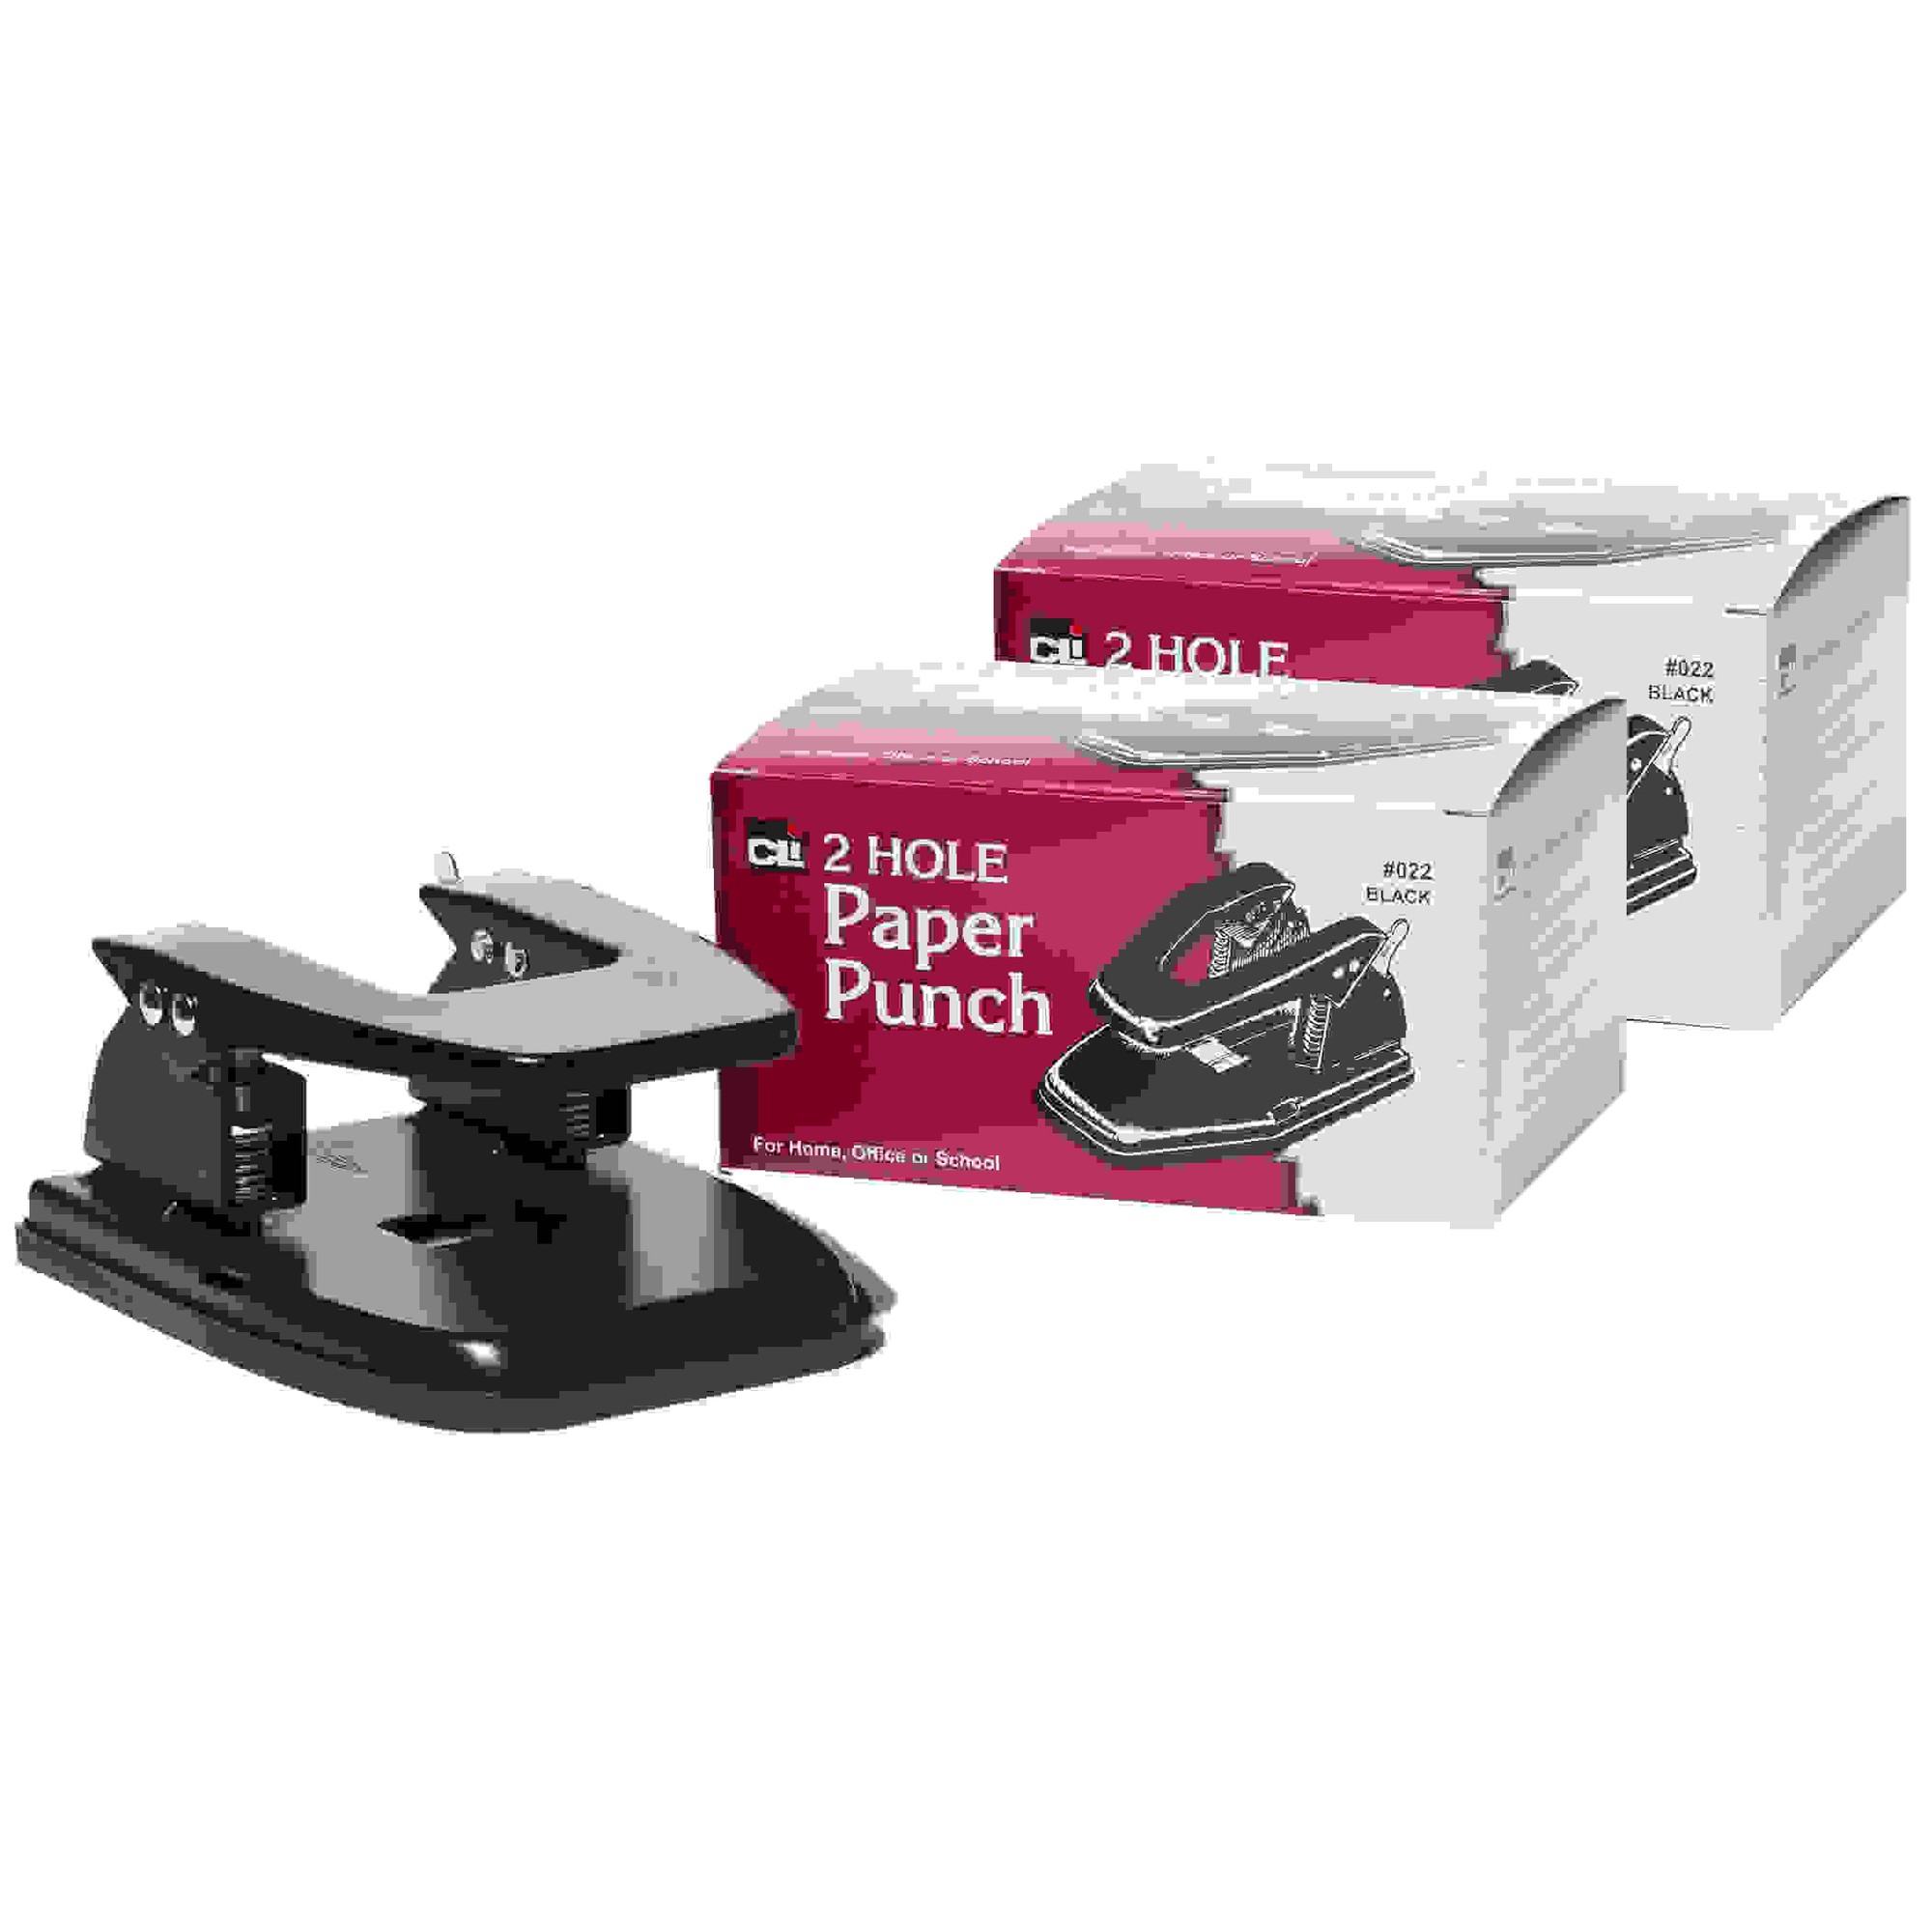 2-Hole Paper Punch, 2 3/4" Center, 30 Sheet Capacity, Black, Pack of 2